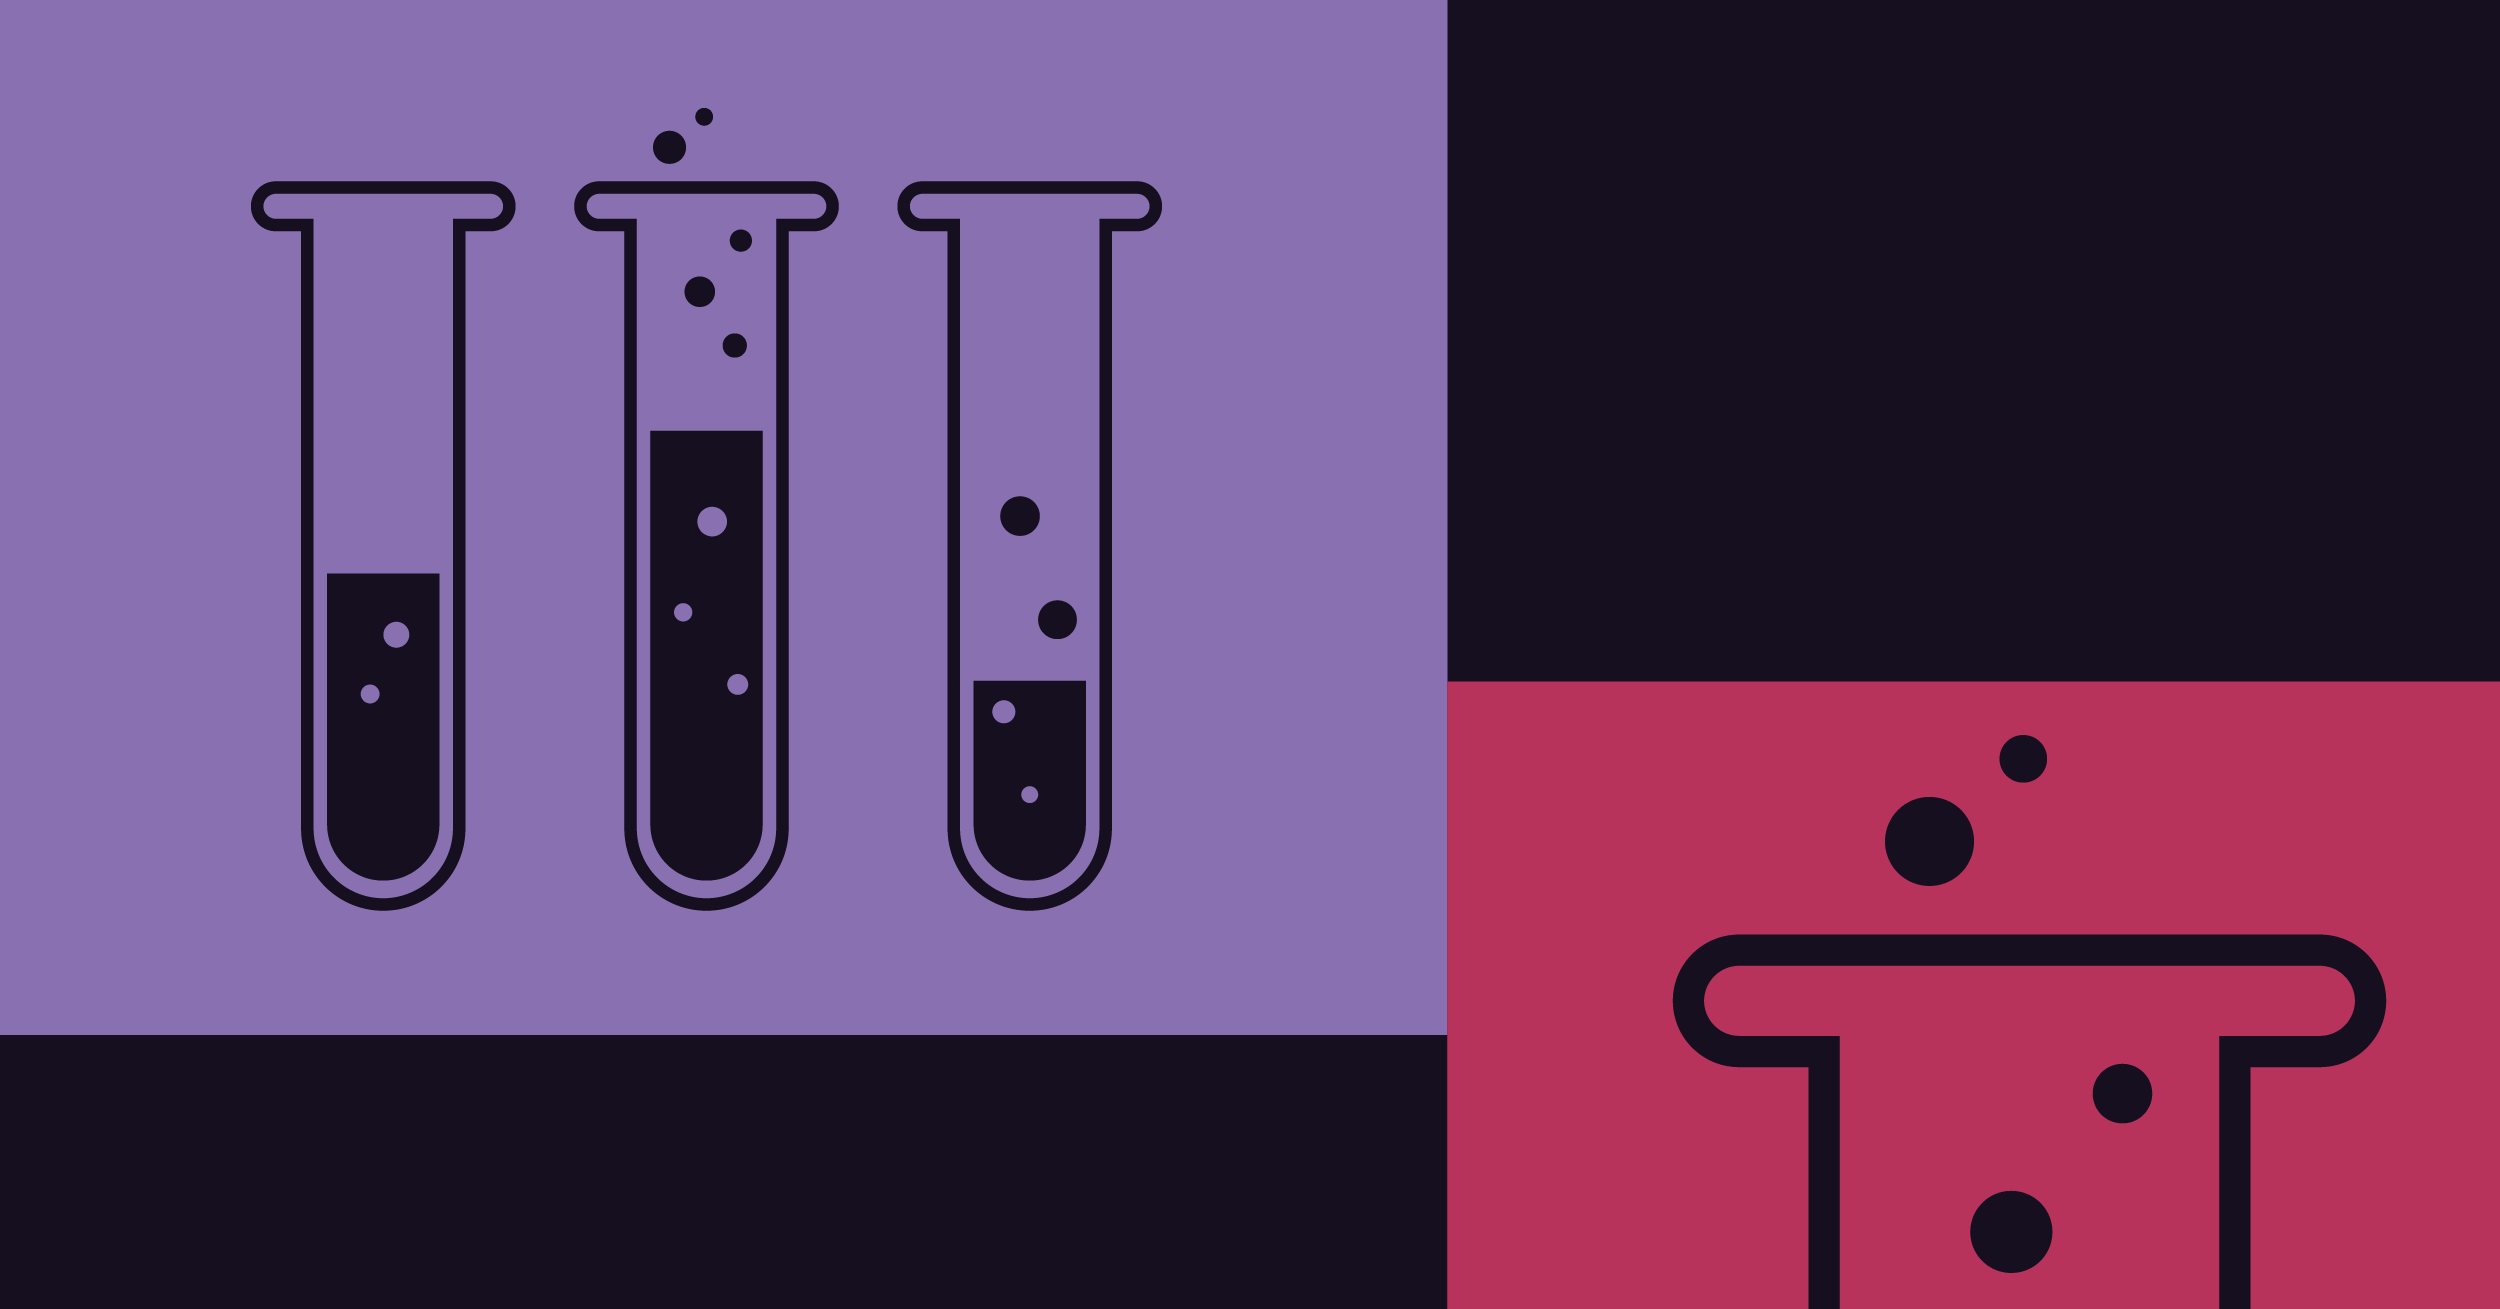 Illustration of three black laboratory sample tubes with bubbling liquid outlined in purple and one large black laboratory sample tube outlined in pink in front of a black background depicting the biotechnology industry